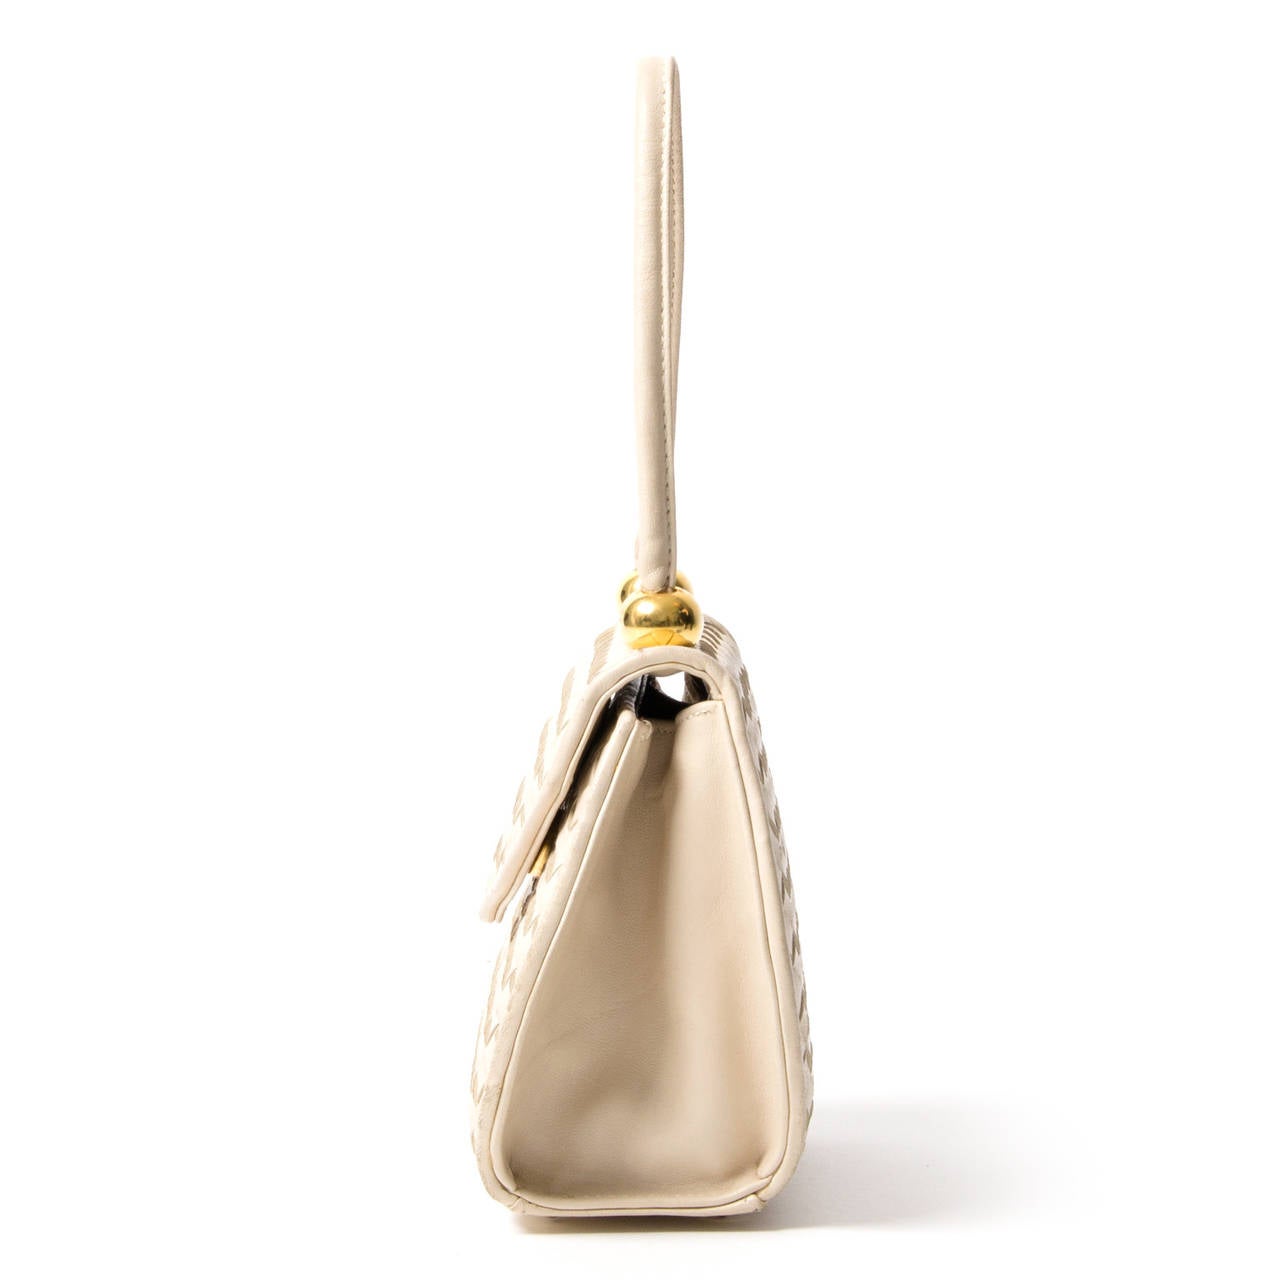 This very small bag comes in cream woven leather with gold colored hardware. The flexible top handle makes this cute number a casual chic style bag, perfect for those who don't carry around much. Four studs on the bottom protect the leather of the